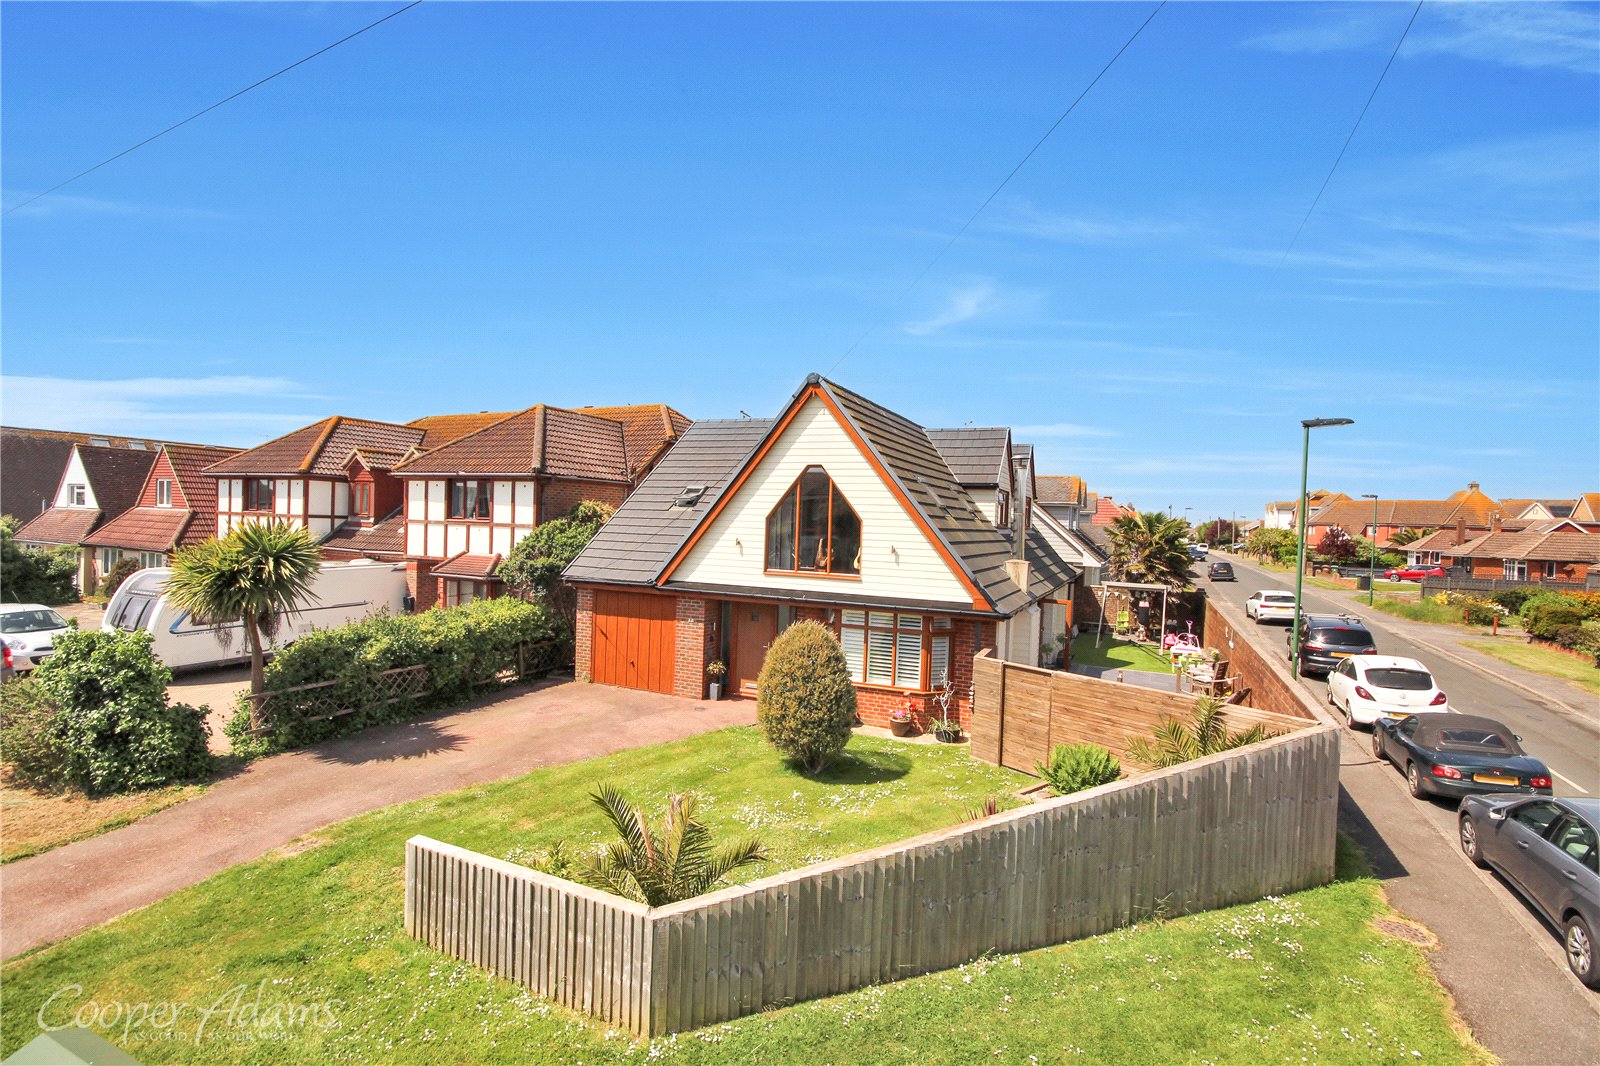 5 bed bungalow for sale  - Property Image 1